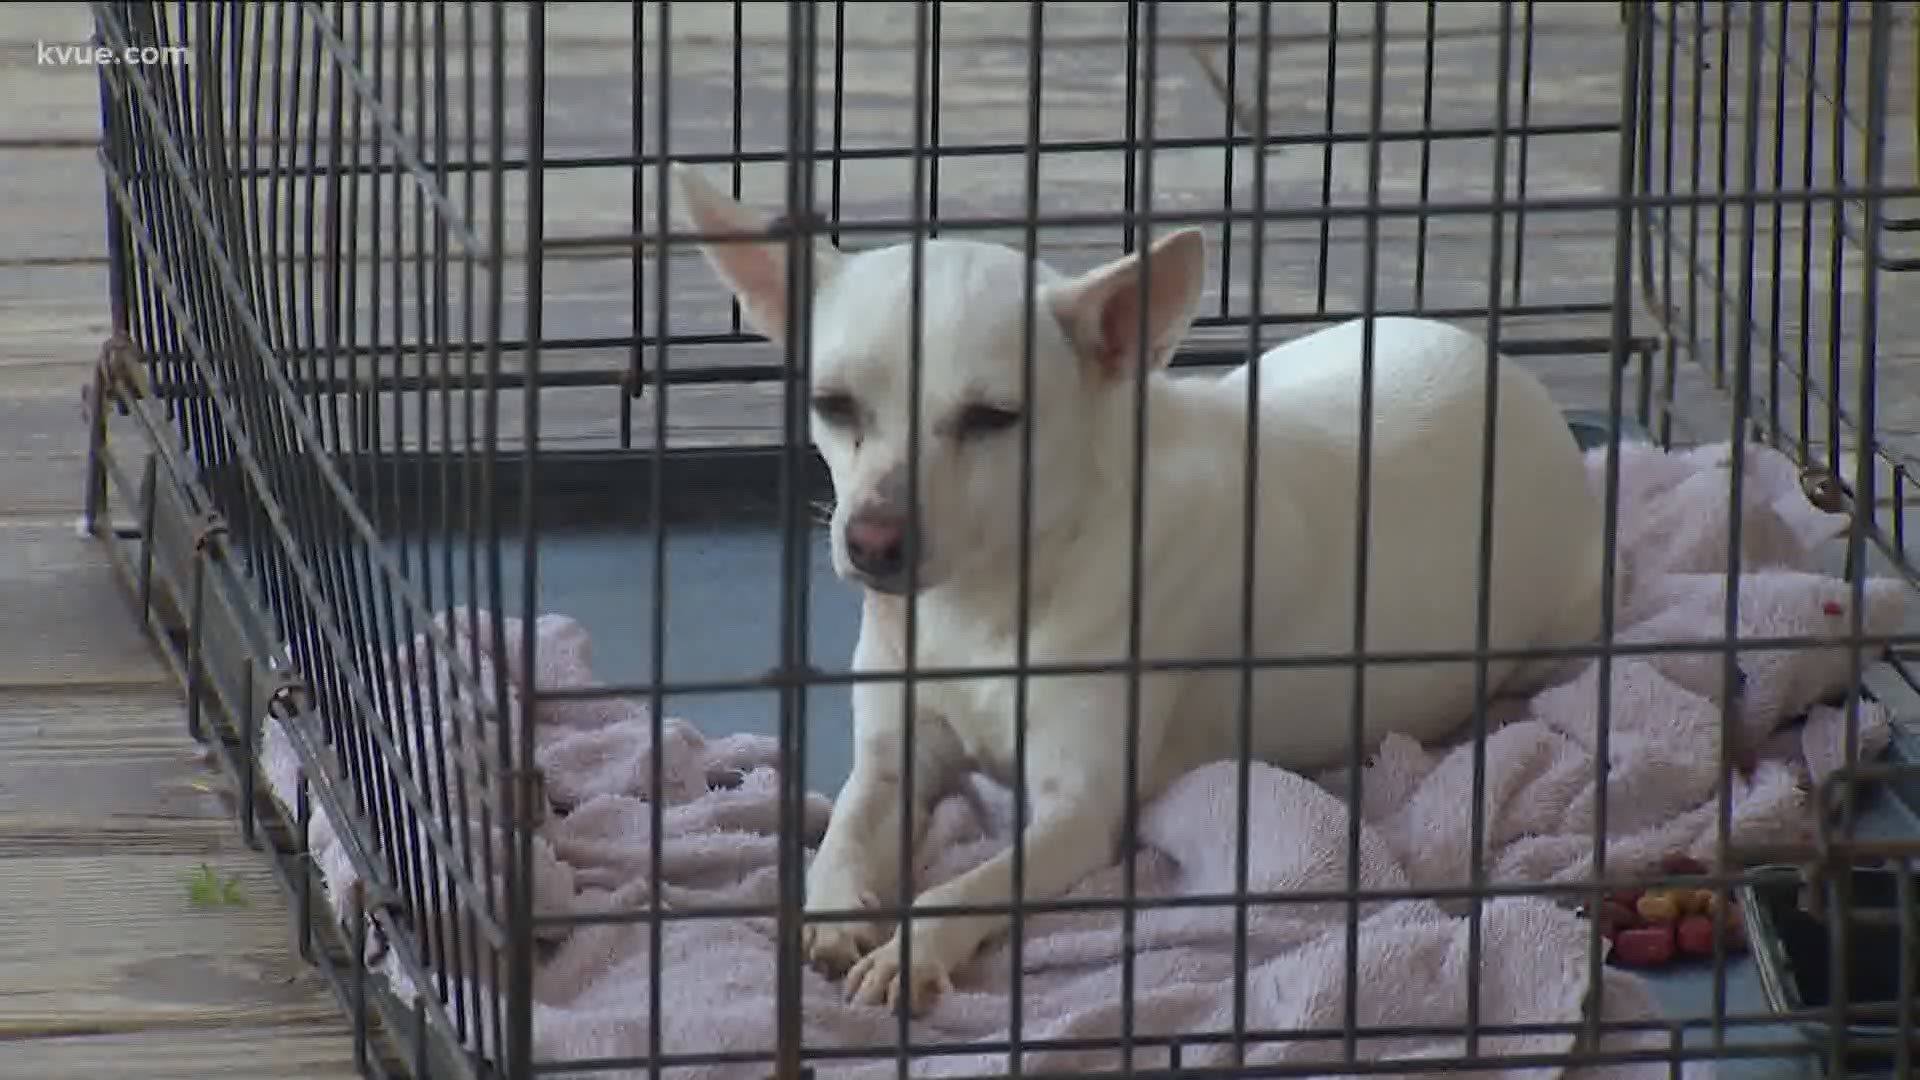 An Austin family wants answers after someone shot their dog.